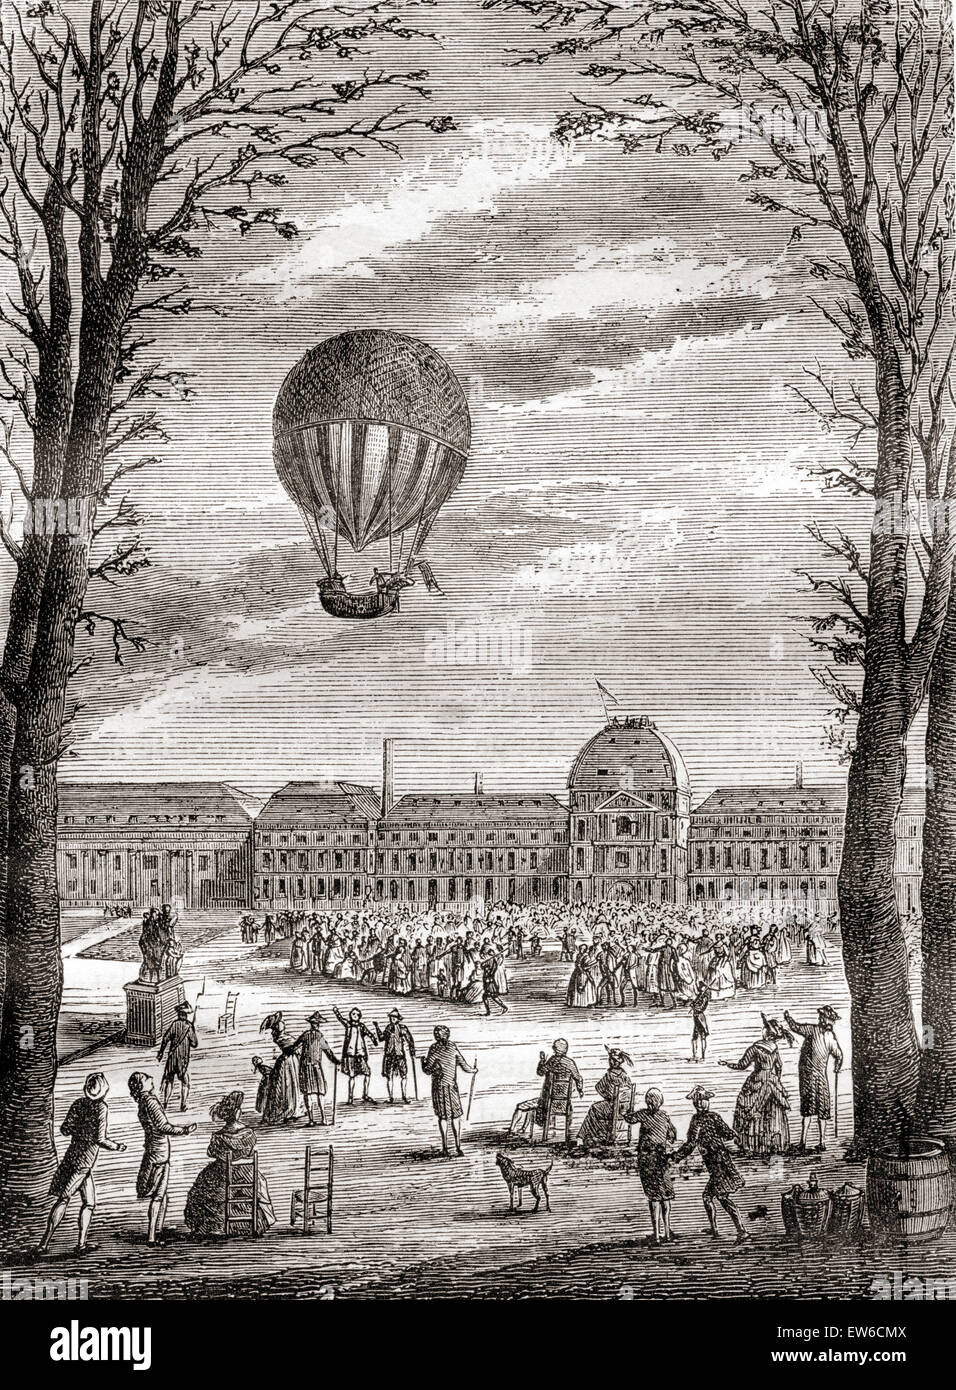 The world's first manned hydrogen balloon flight over the Champs de Mars, Paris, France in 1 December 1783, piloted by Nicolas-Louis Robert and professor Jacques Charles. Stock Photo